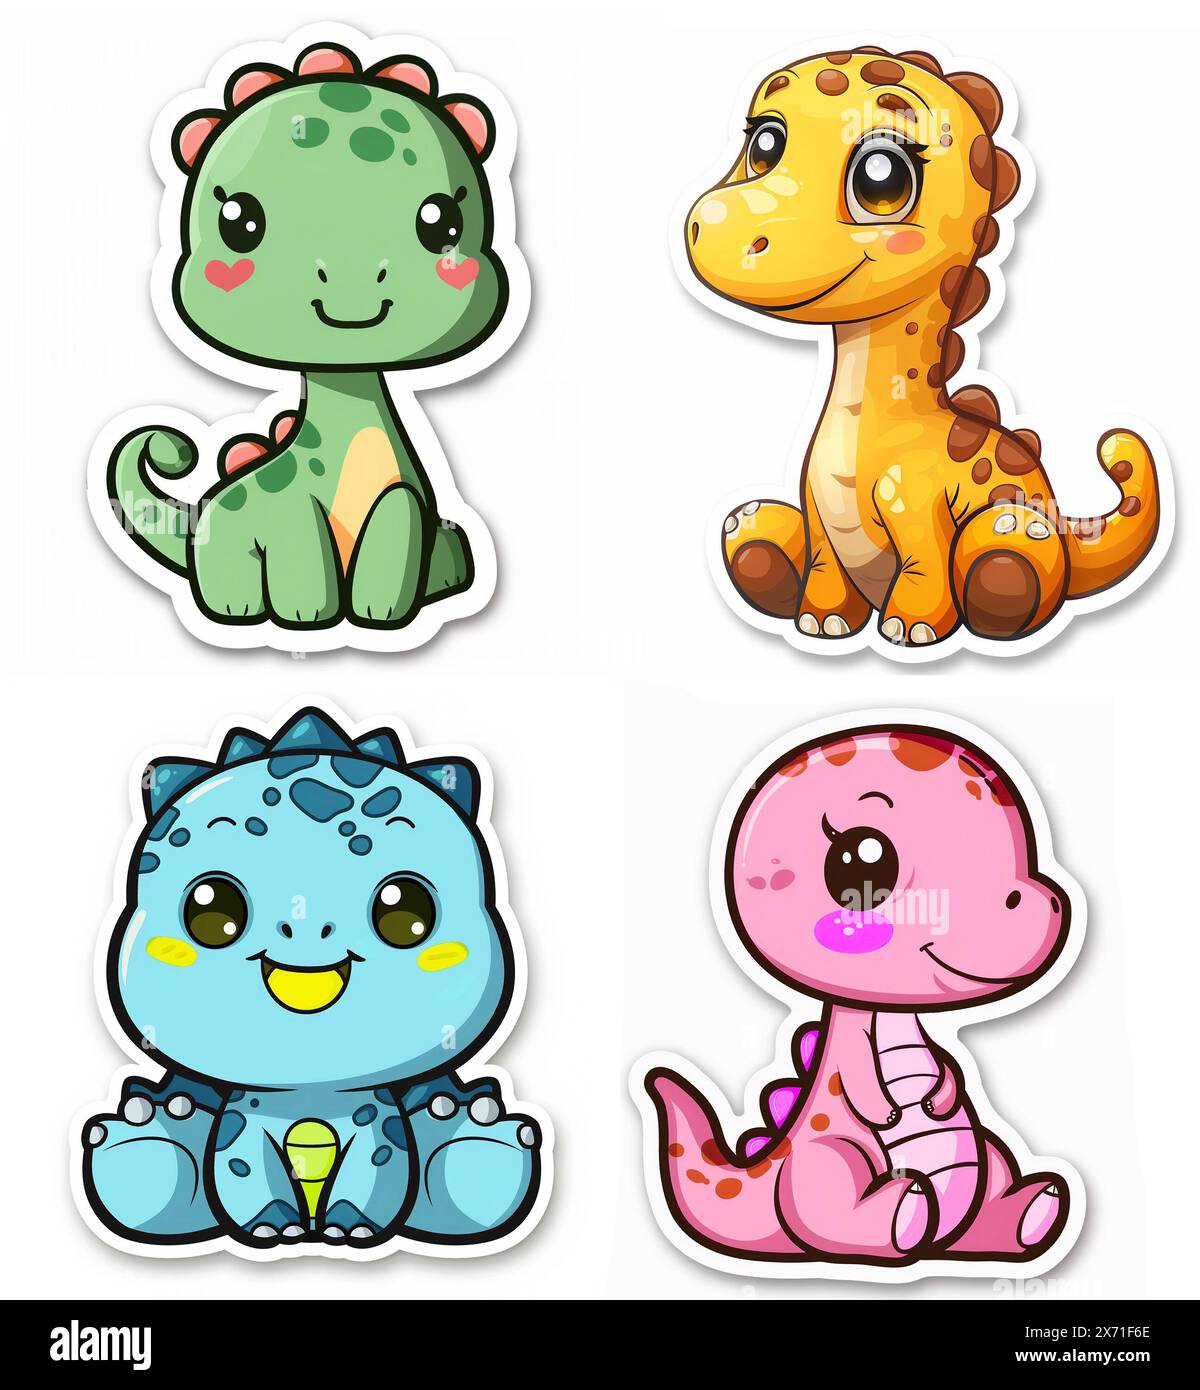 Cute kawaii ilustrations of different dinosaurs for stickers, emotes twitch, room decoration, logo, graphics, clipart, isolated, character design, dec Stock Photo